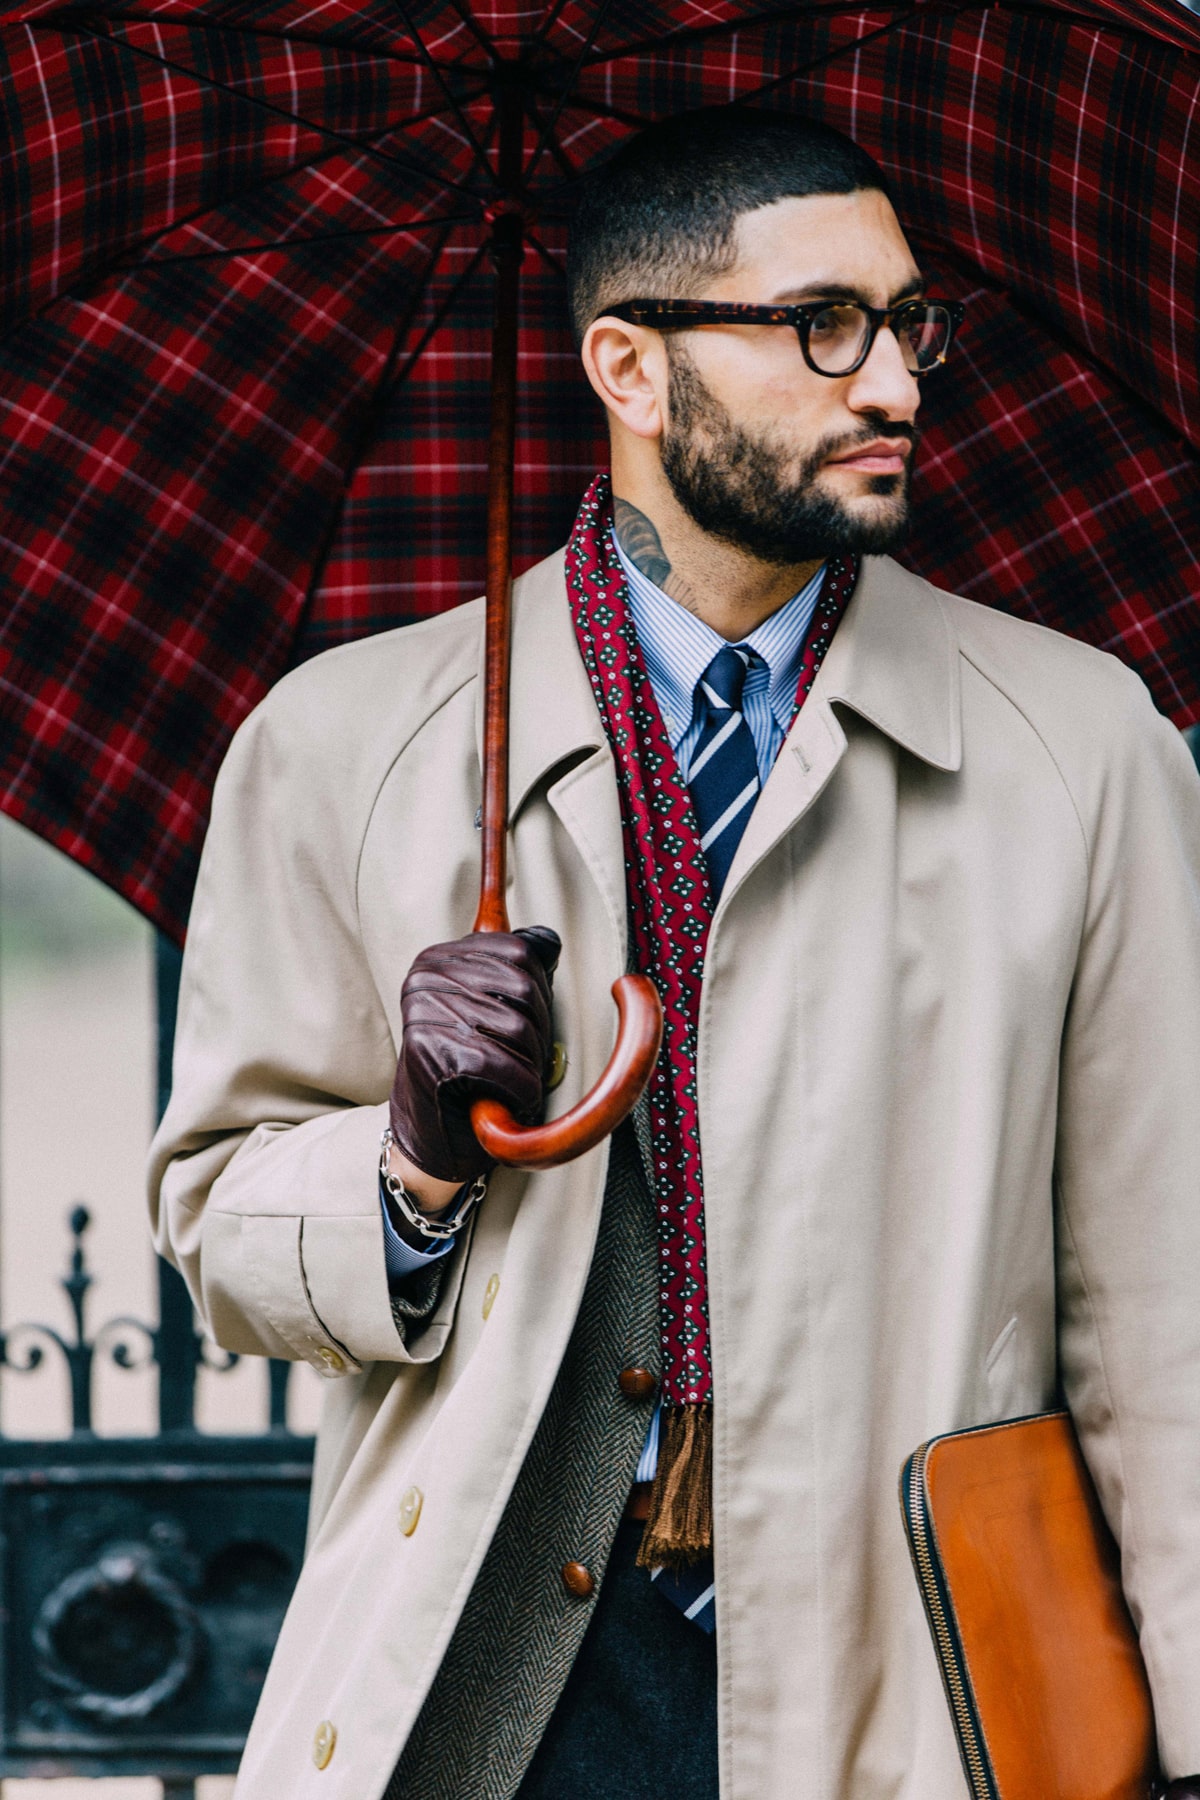 Umbrellas: Would You Part with Lots of Lolly for a Brolly?